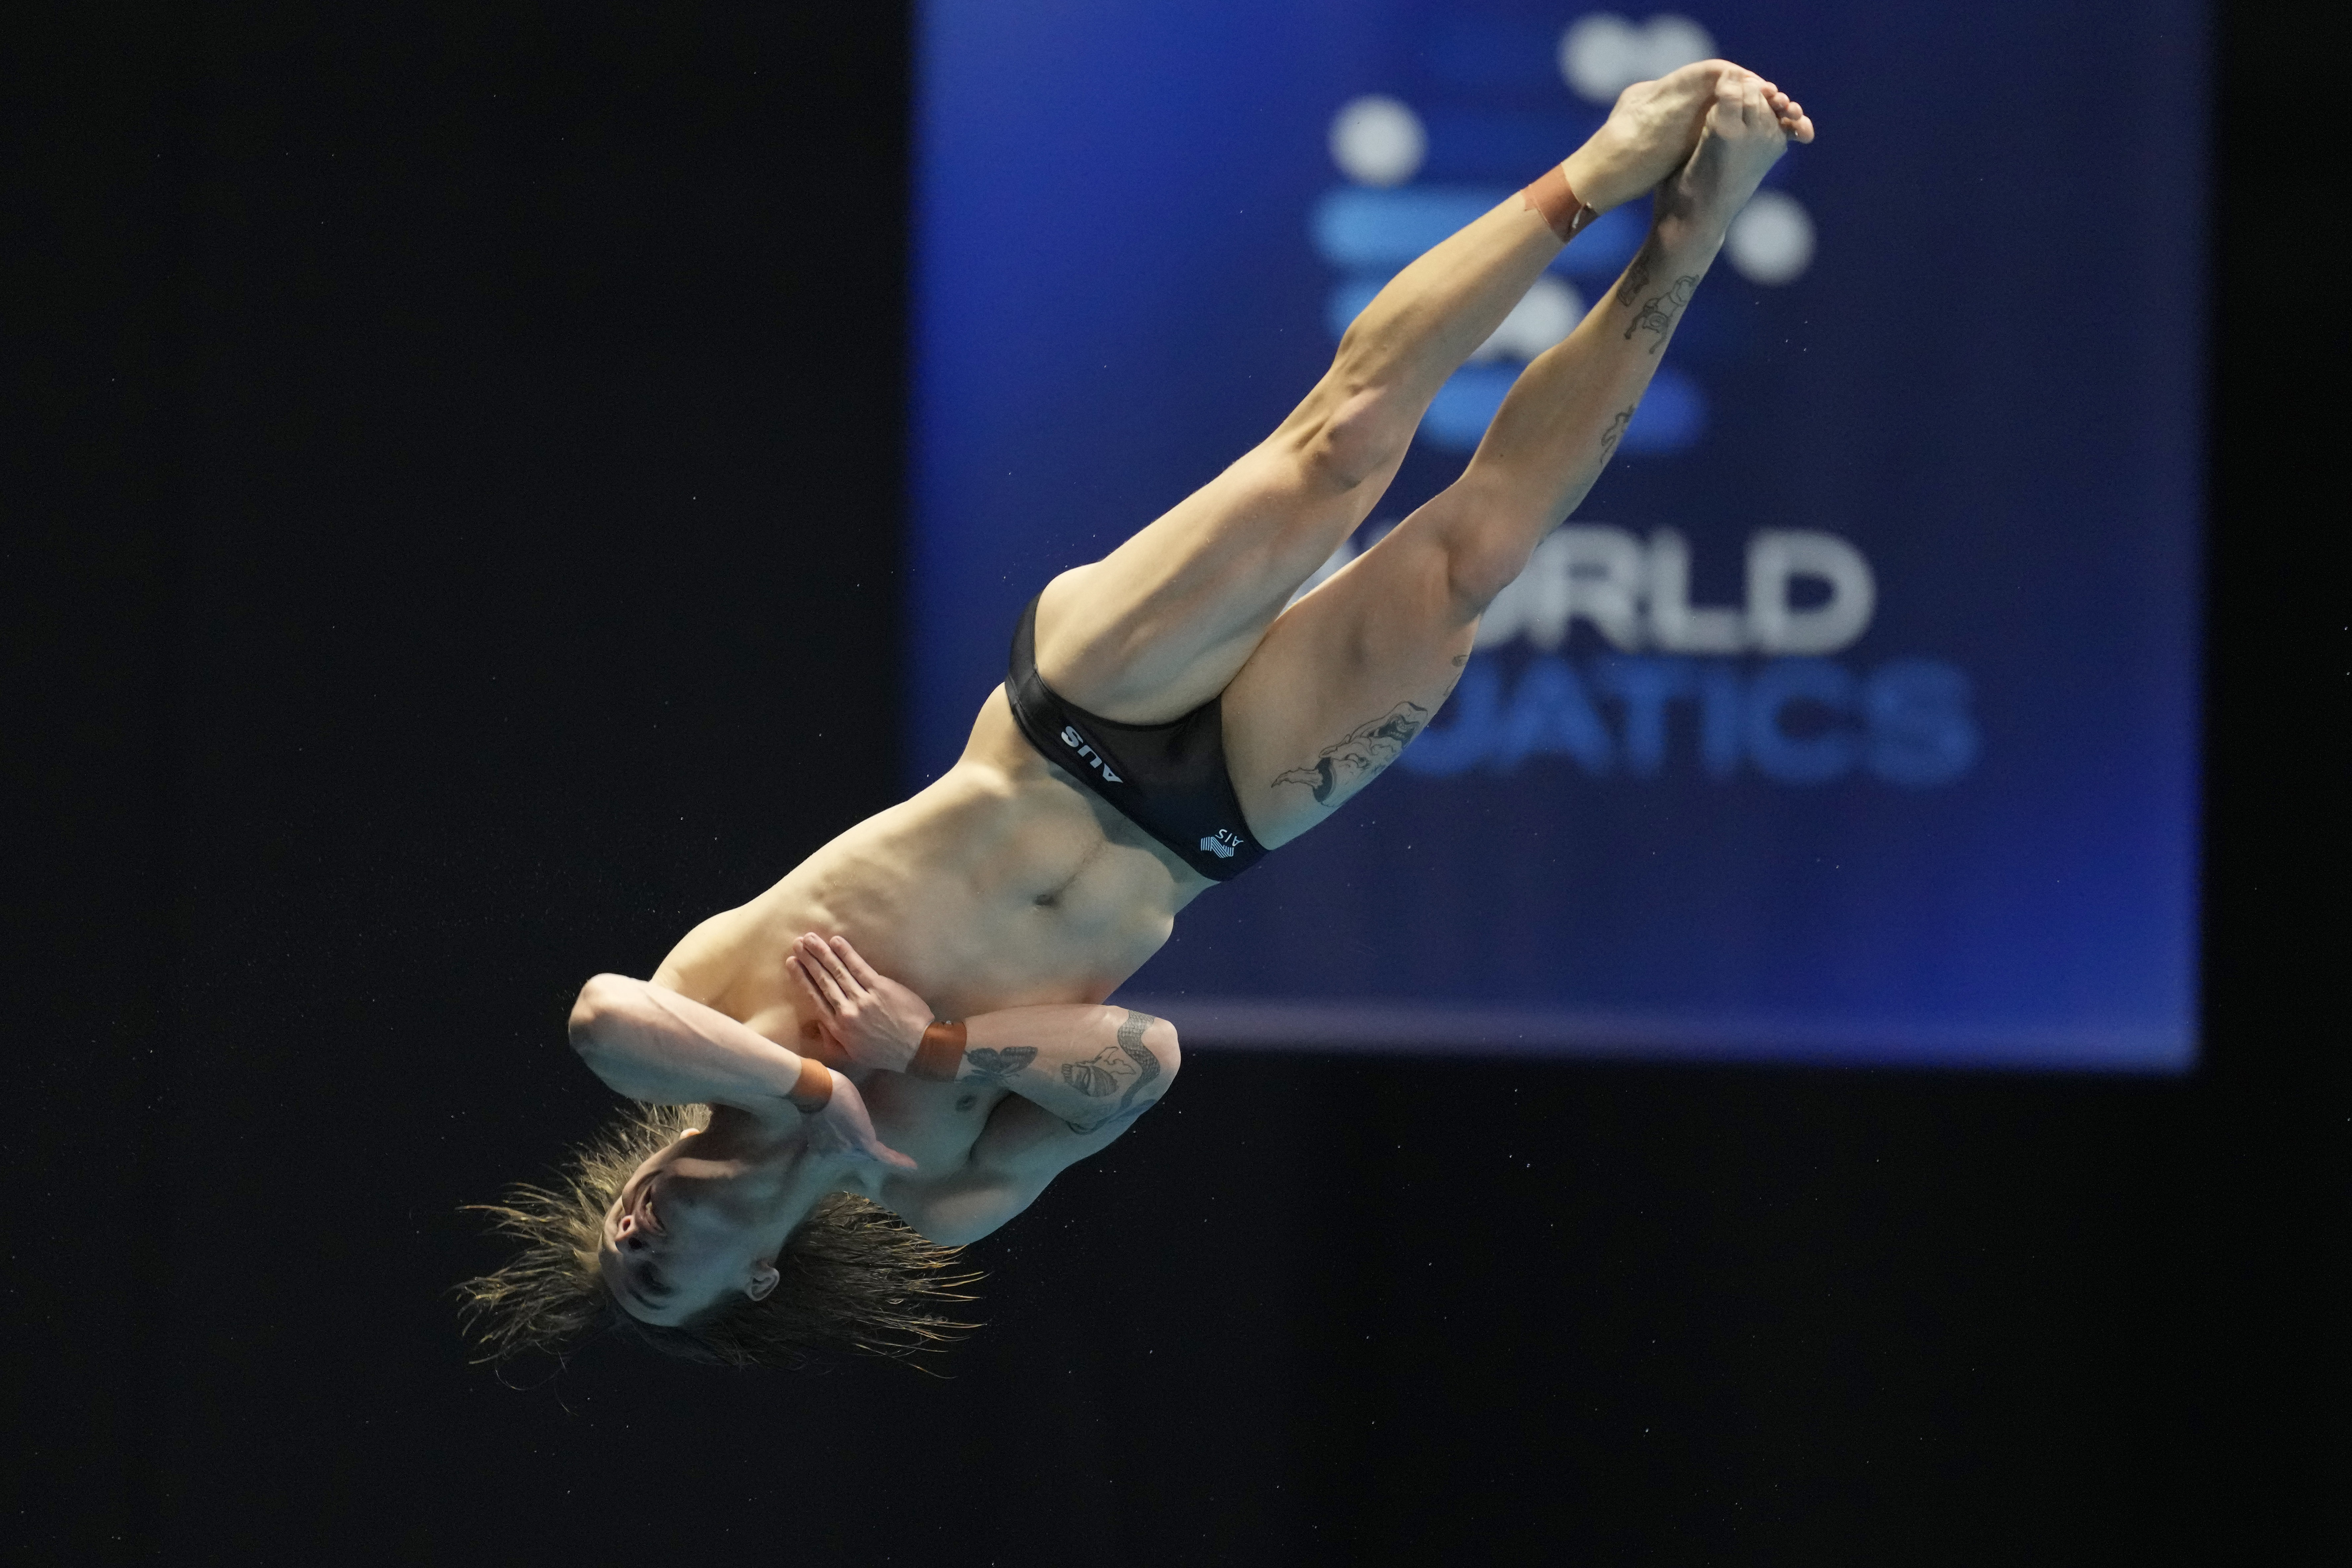 Cassiel Rousseau of Australia competes during the men's 10m platform diving preliminary at the World Swimming Championships in Fukuoka, Japan, Friday, July 21, 2023. (AP Photo/Lee Jin-man)